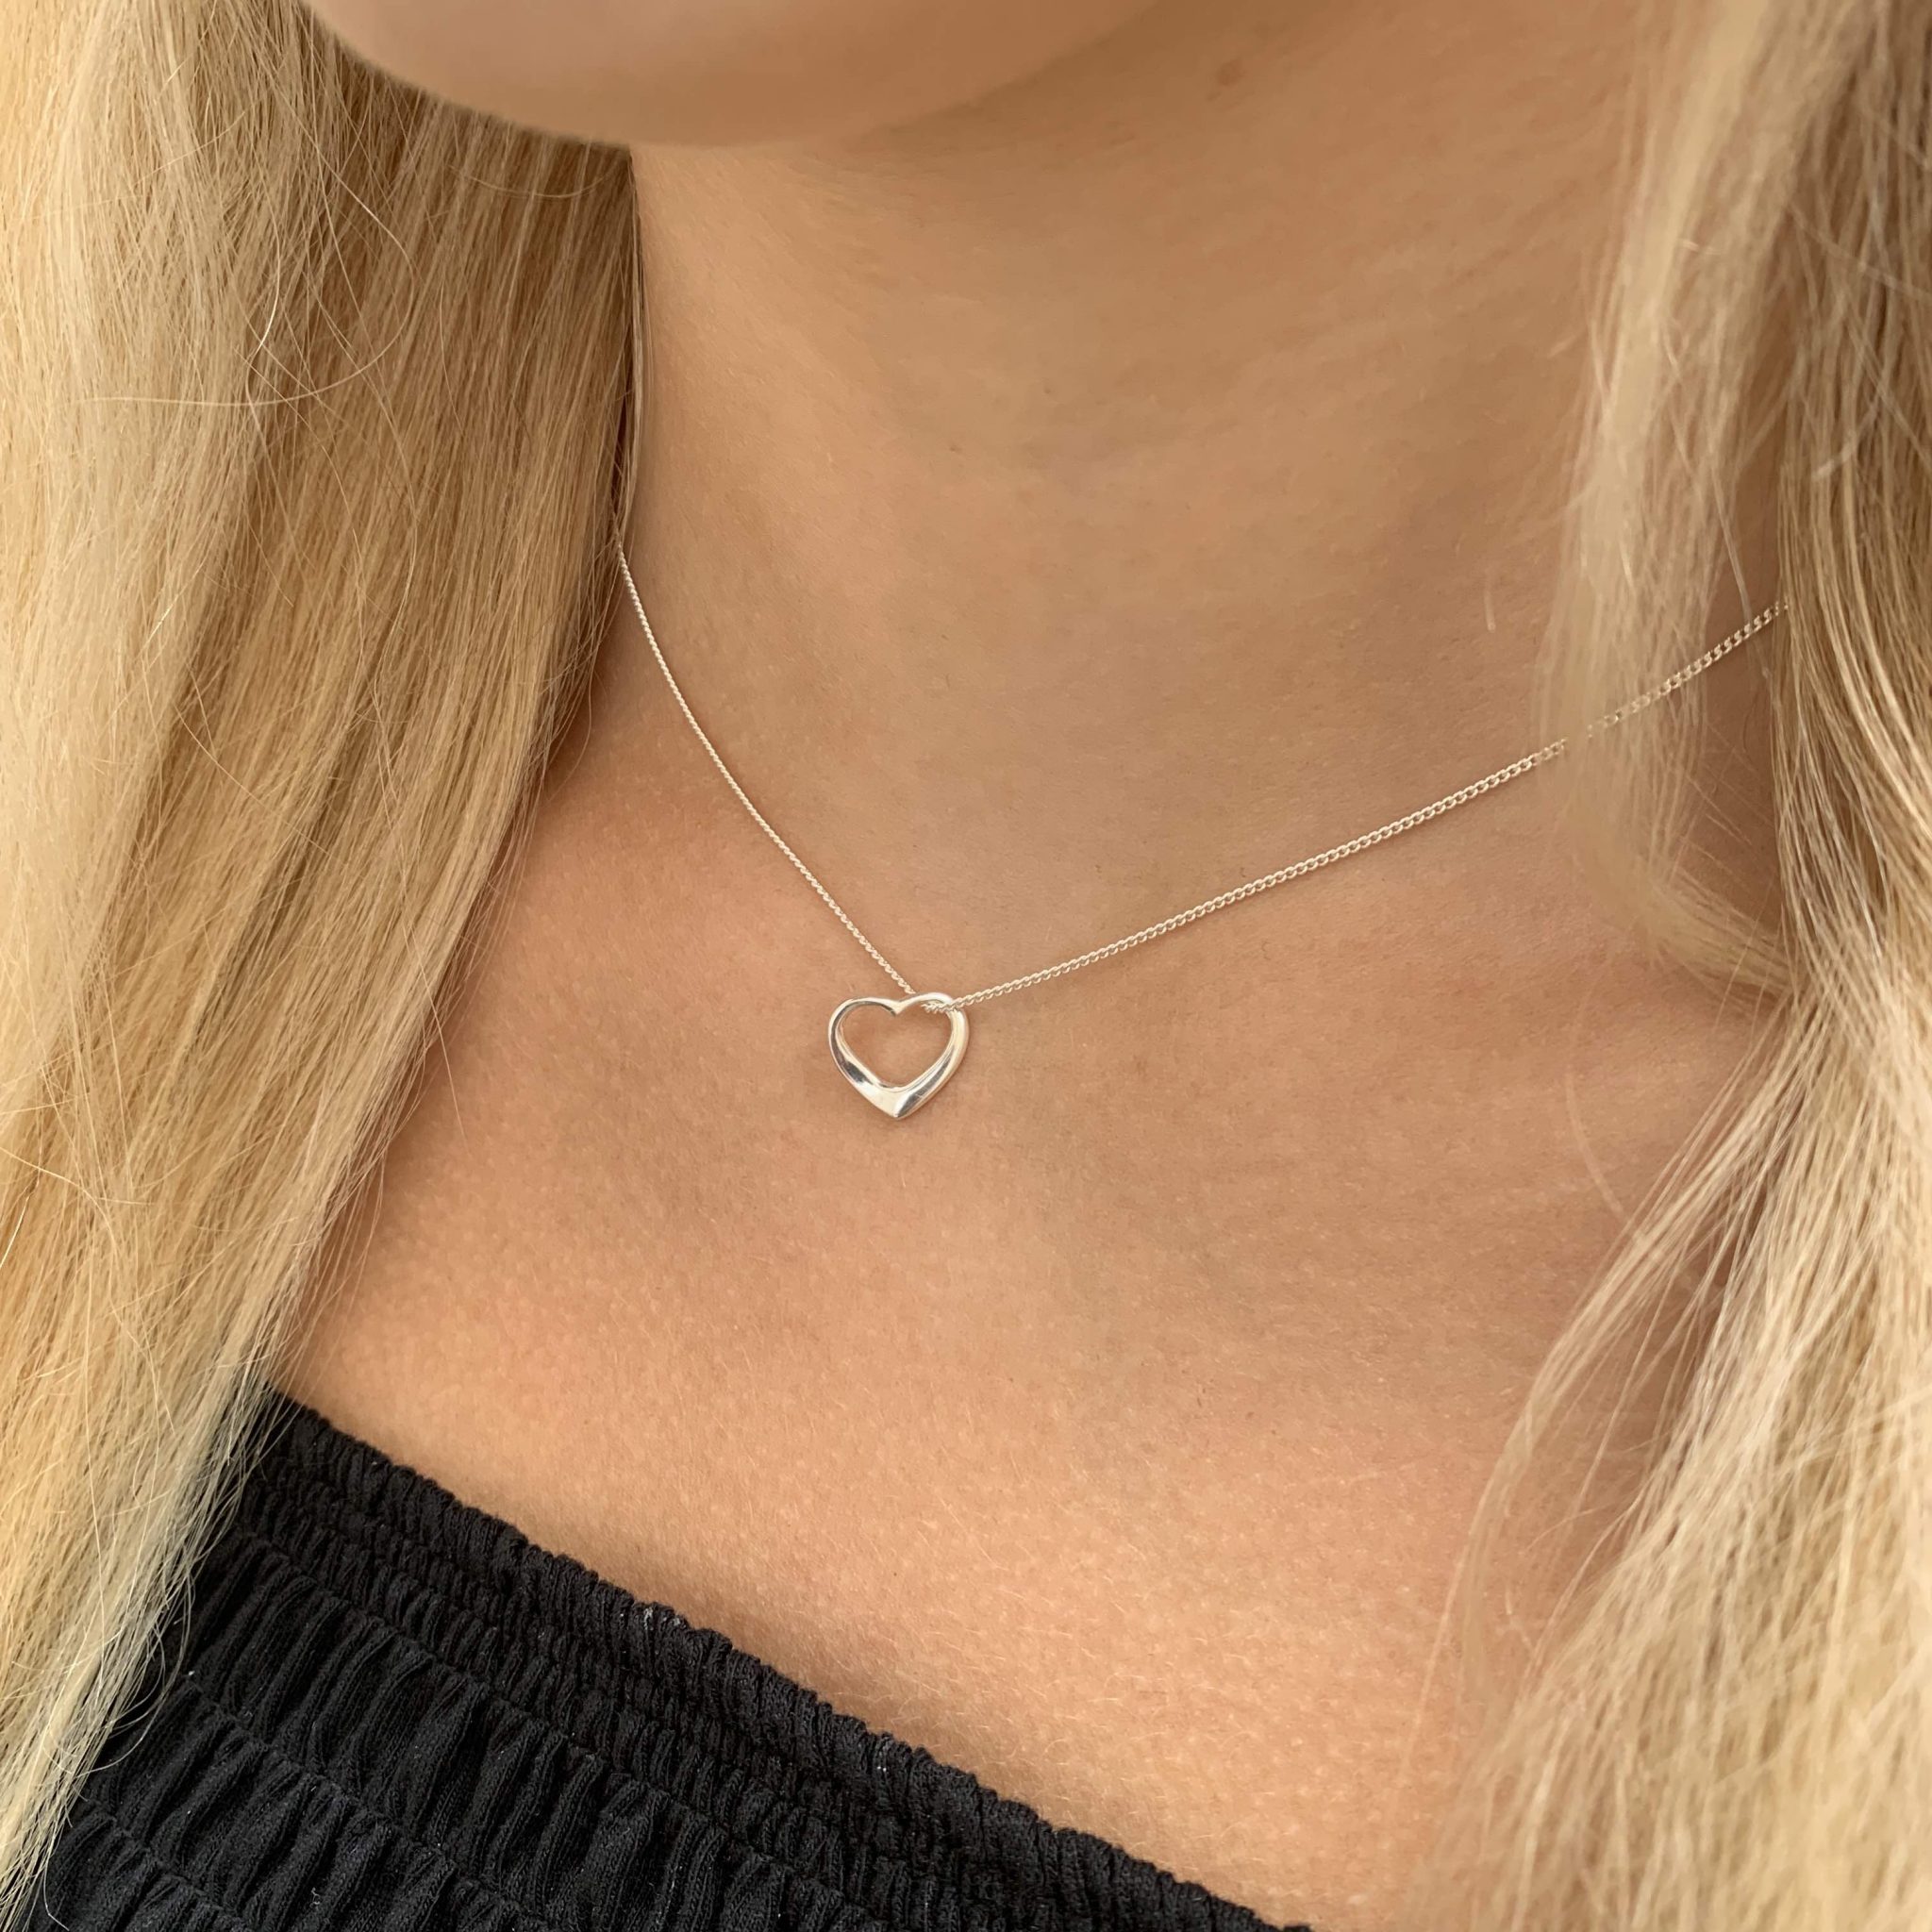 Custom wholesale 925 Sterling Silver Tiny Silver Floating Heart Necklace  18″ - custom jewelry wholesale